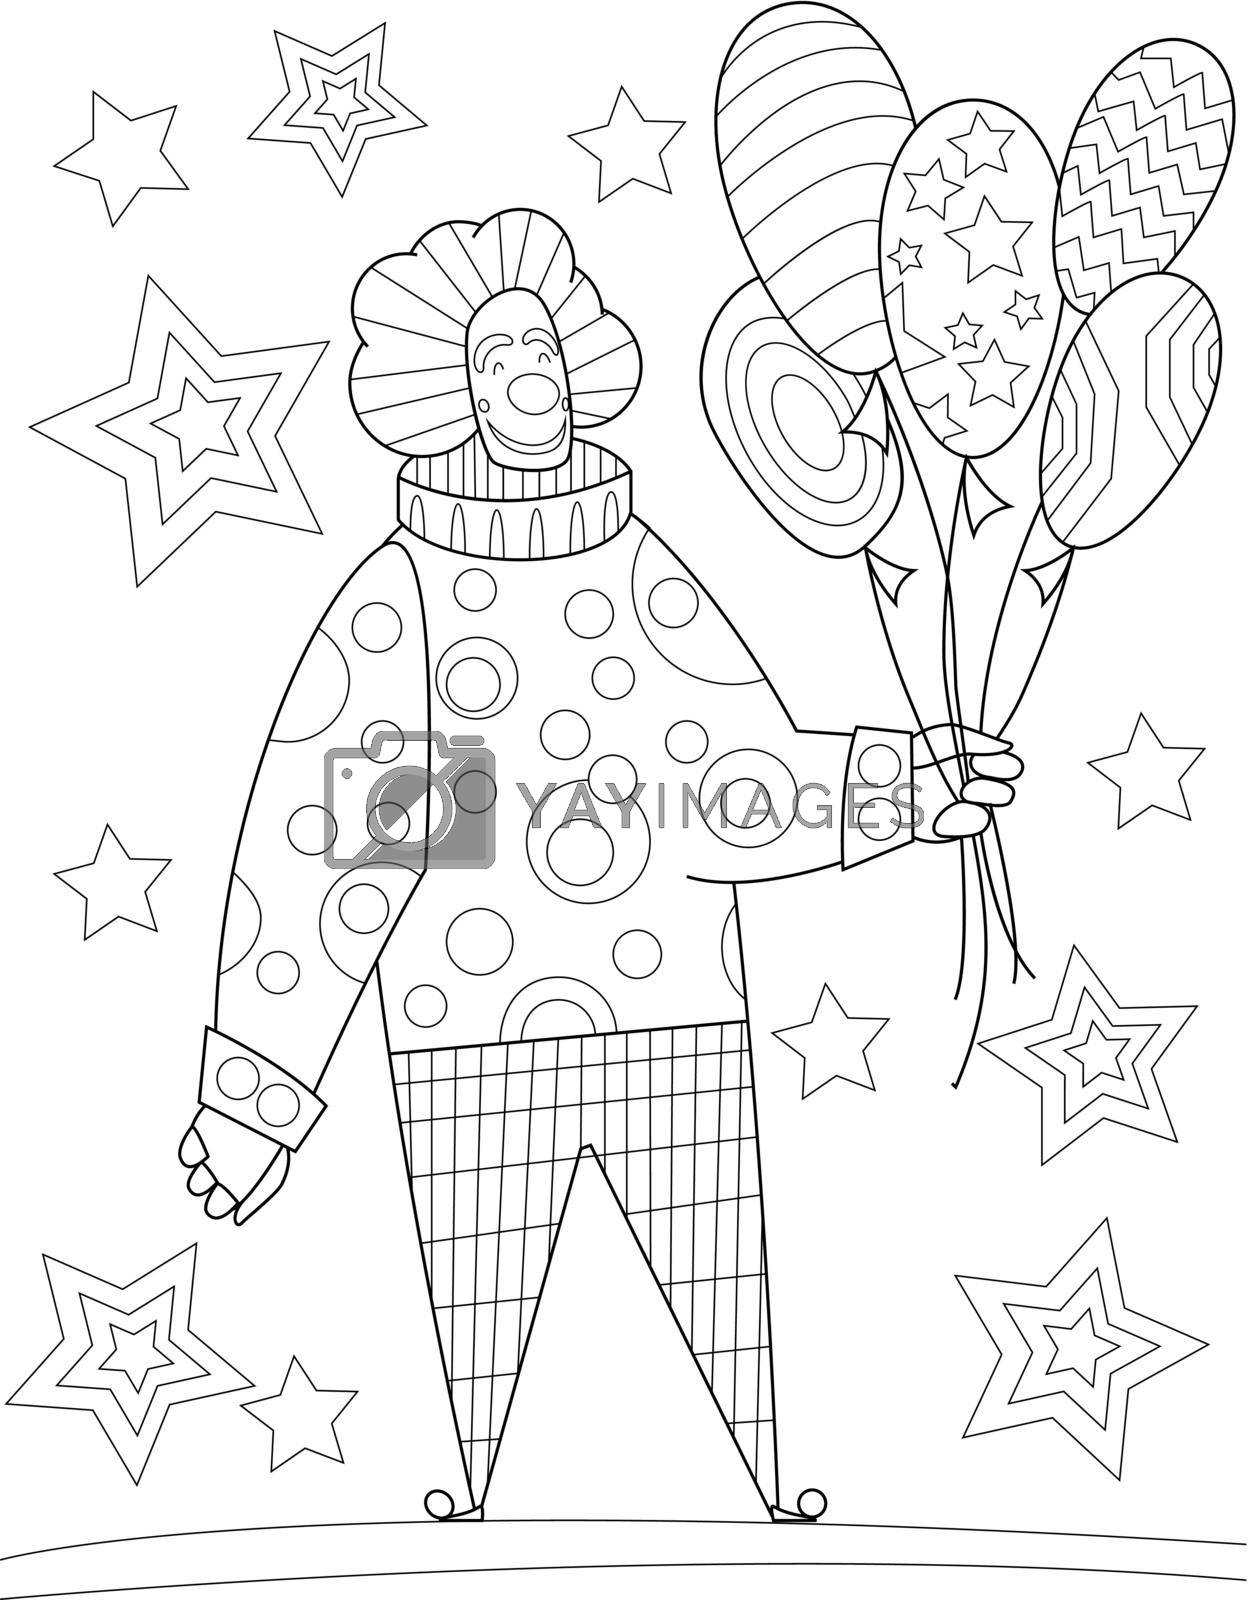 Royalty free image of Coloring Book Page With Clown Holding Balloons With Different Designs In One Hand. Sheet To Be Colored With Comedian With Stars In Background. Amusing Man Celebrating Birthday by nialowwa